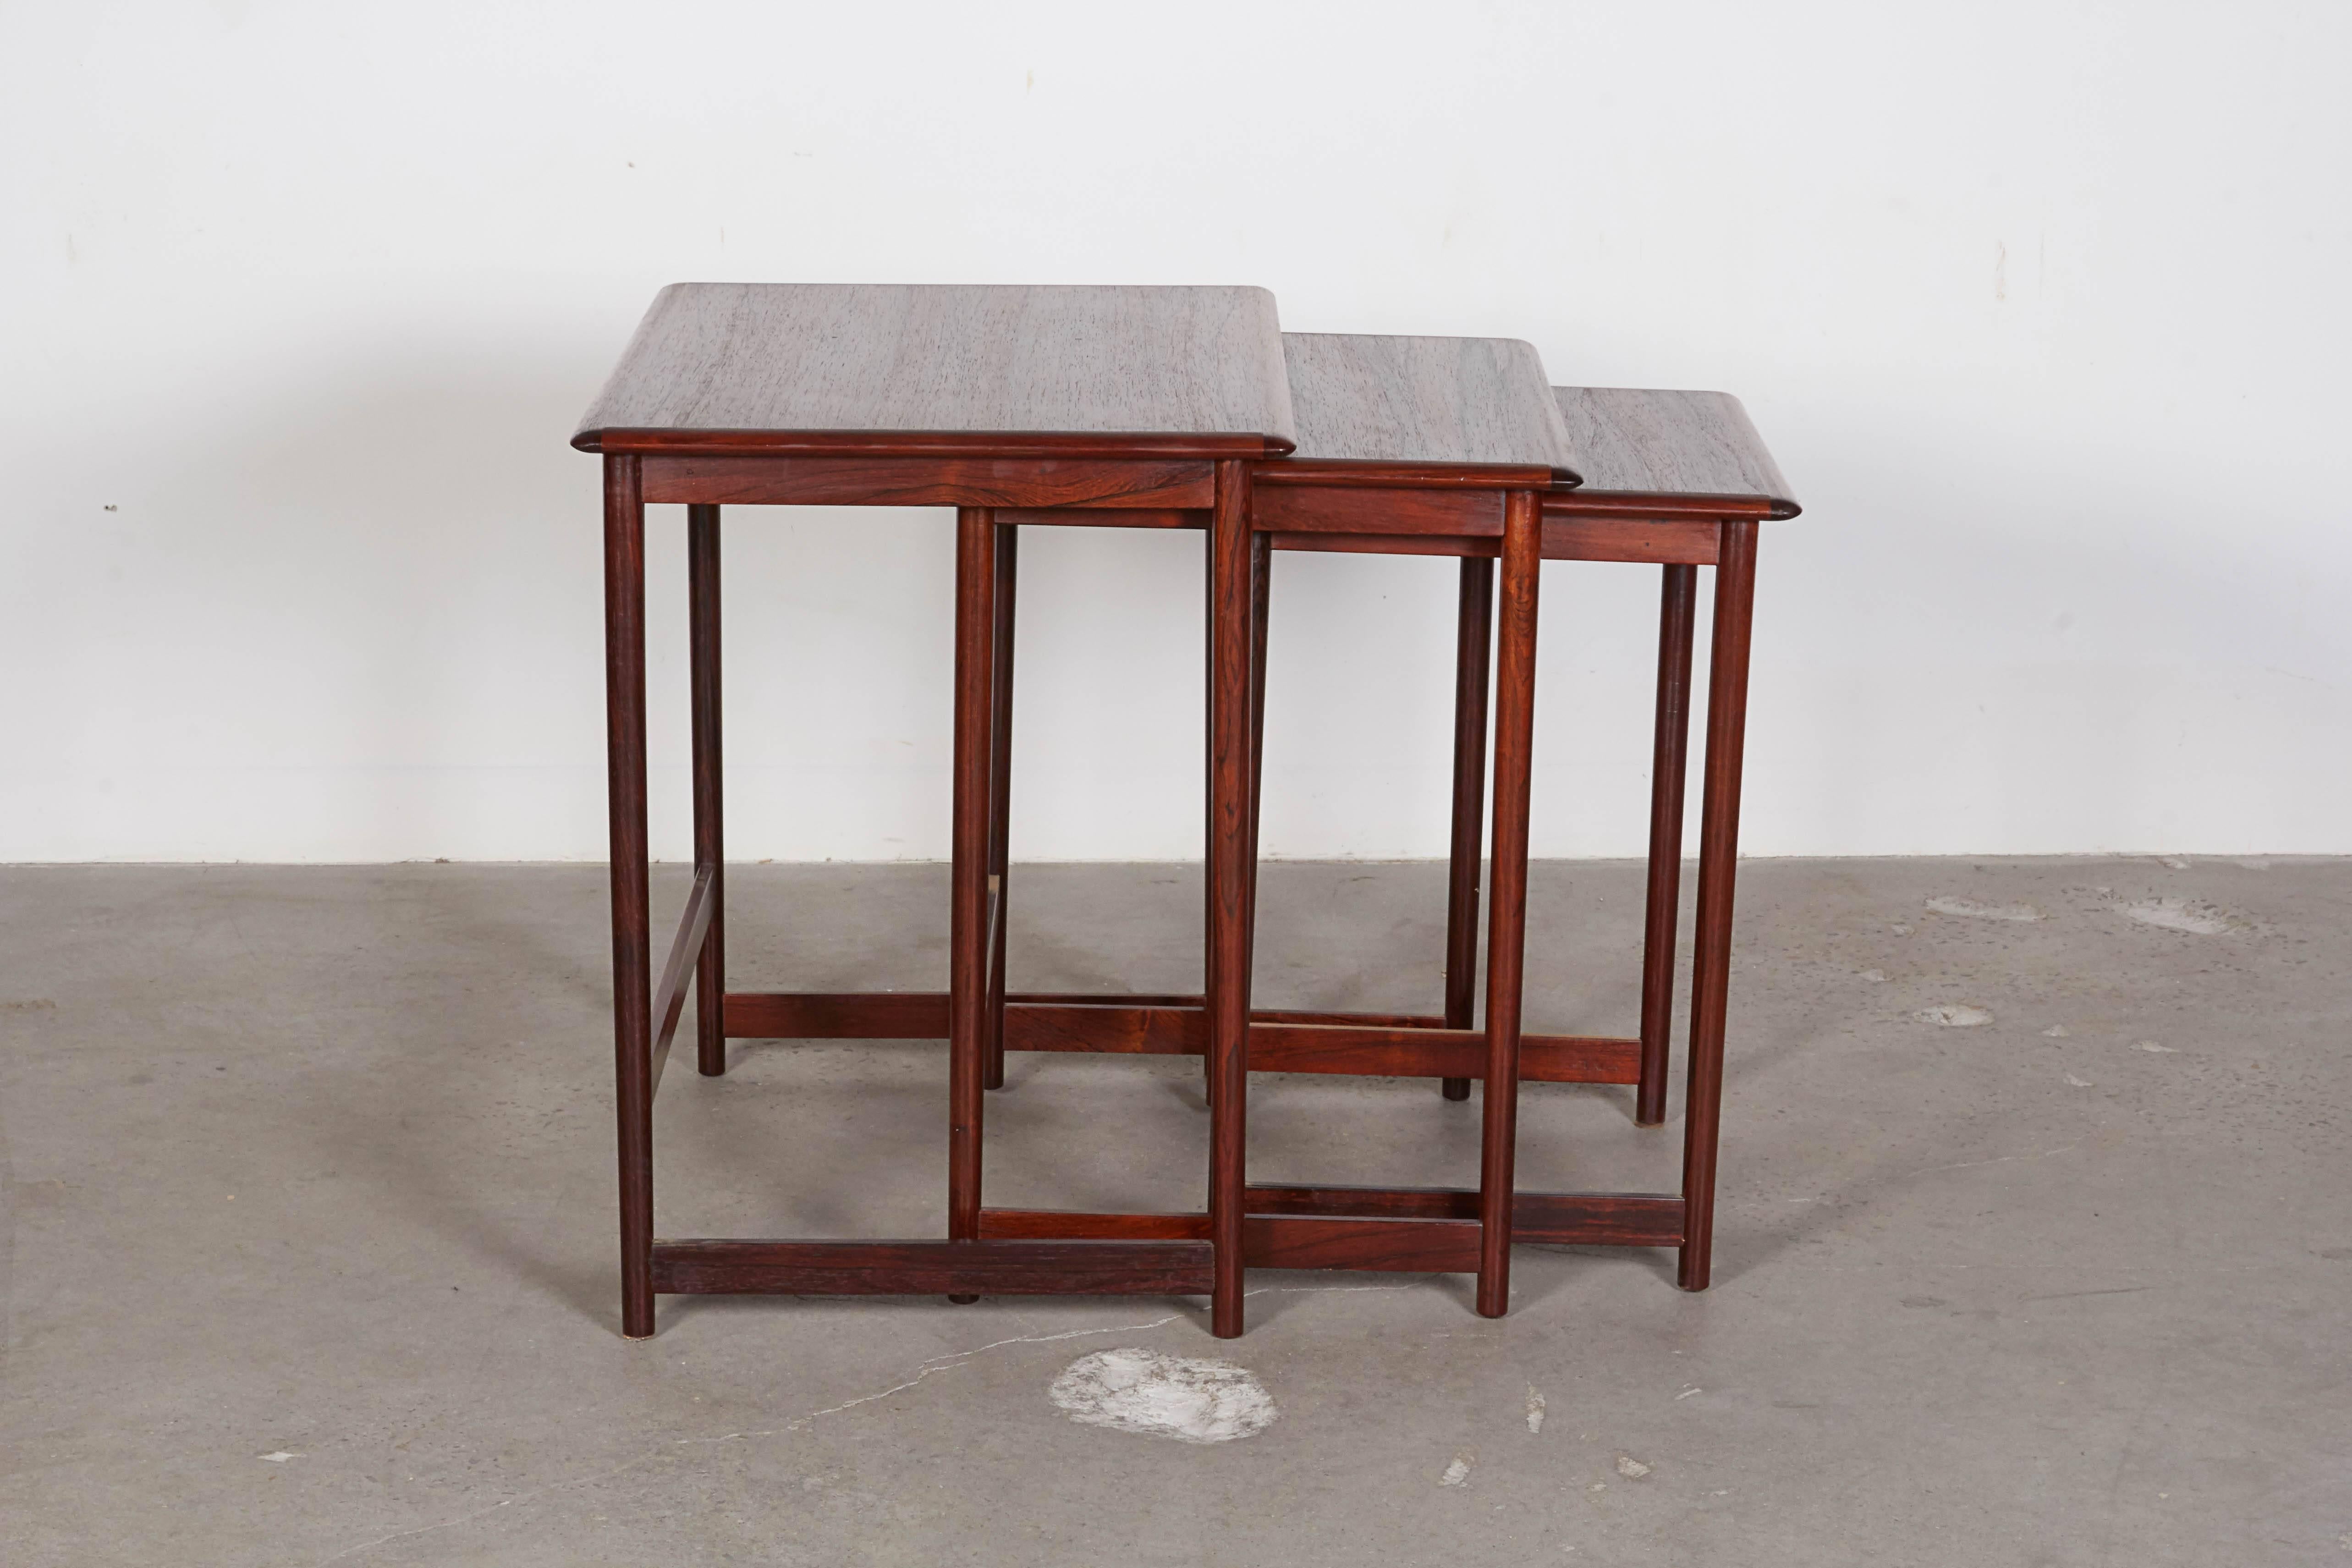 Vintage 1960s Norwegian nesting tables in rosewood.

This set of Danish modern nesting tables are in like-new condition. Nesting tables are incredibly useful the way they can be stored in the corner can free you from the need of a coffee table